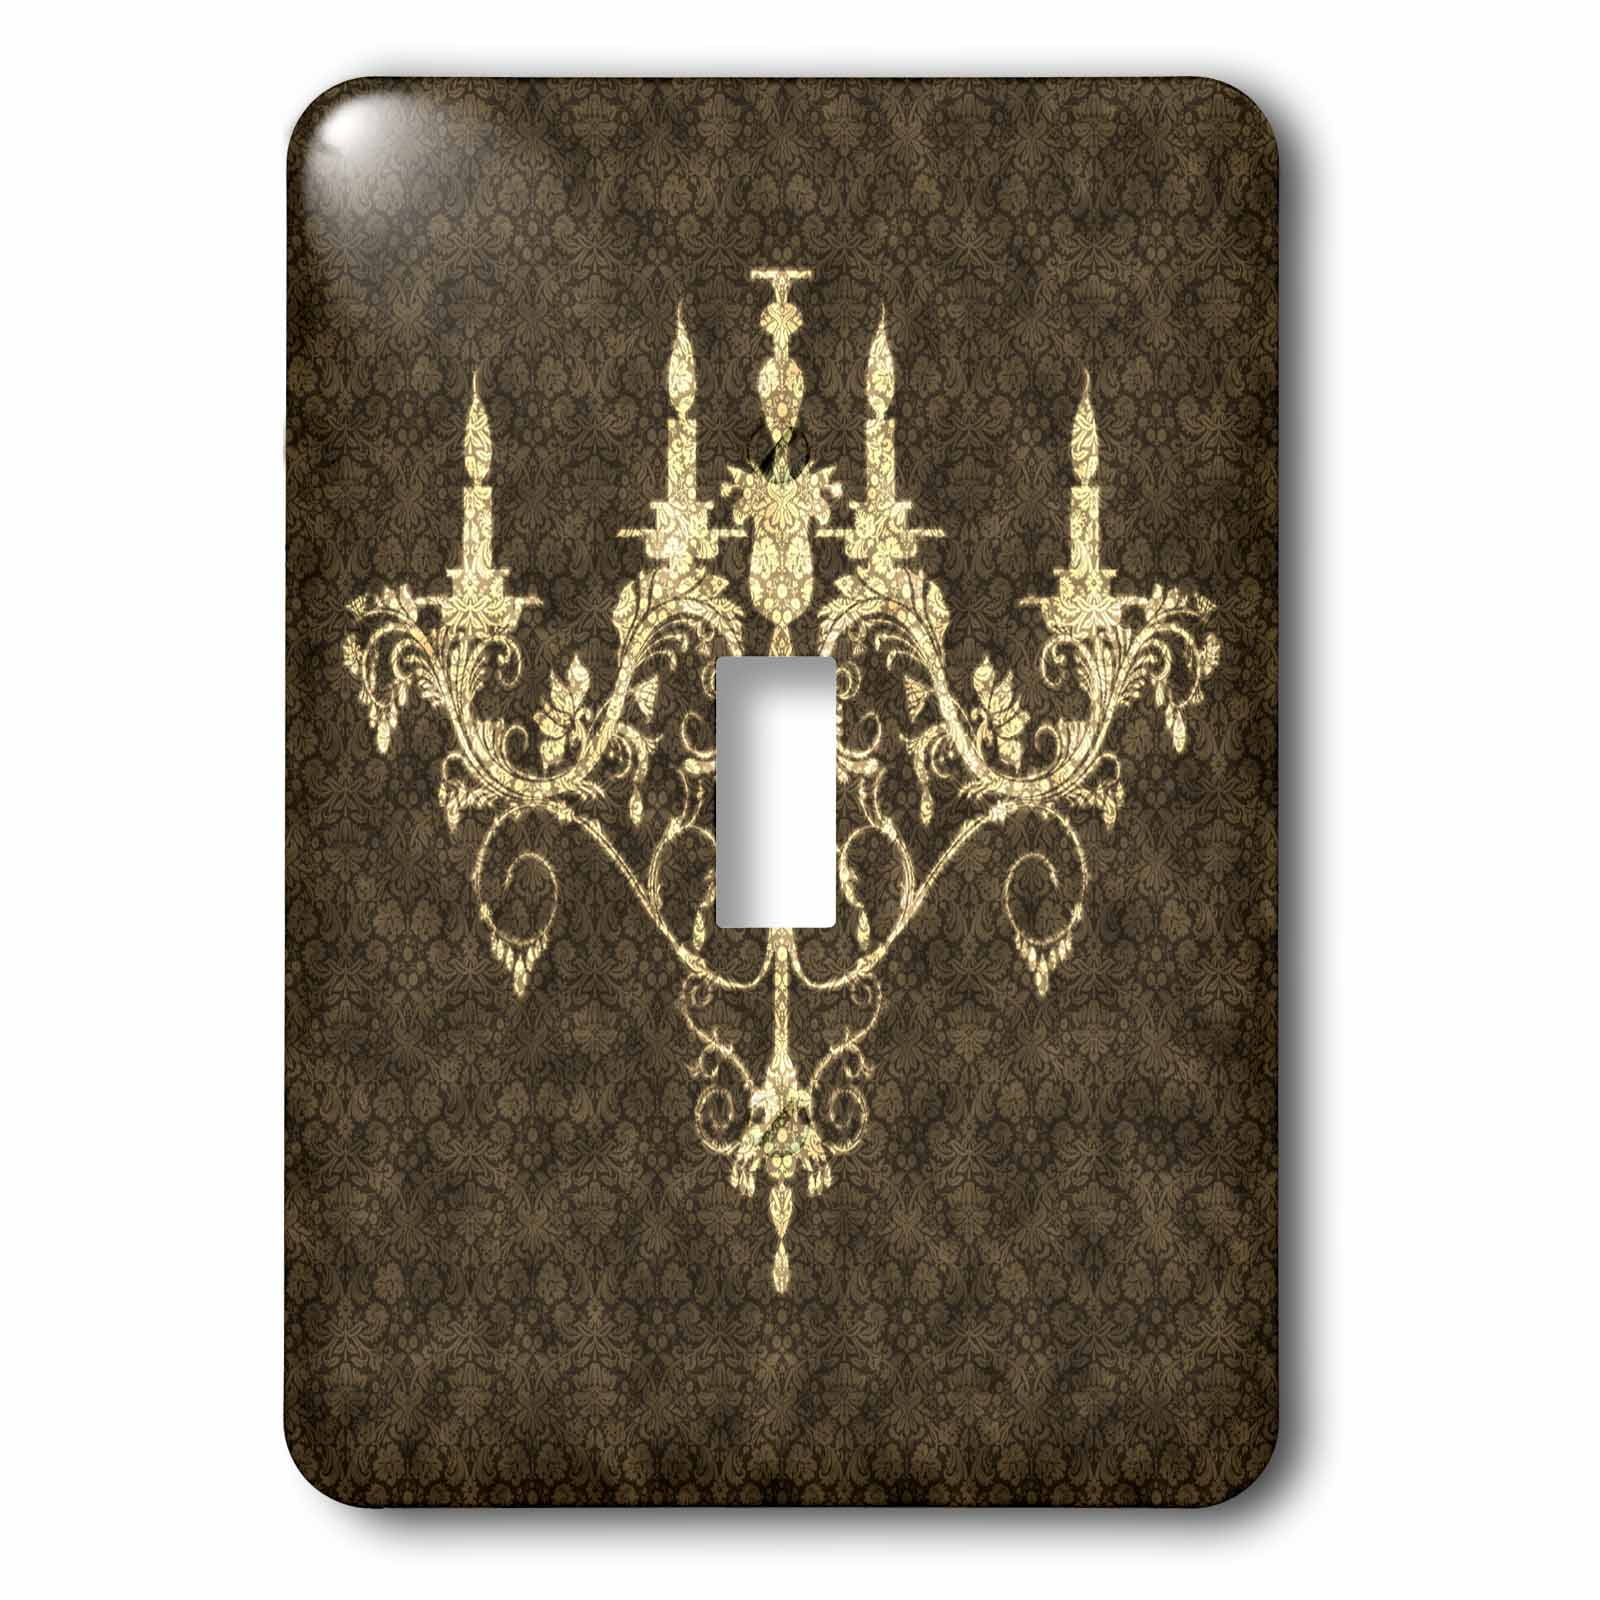 3dRose lsp_32510_1 Chandelier Gold Damask Single Toggle Switch 